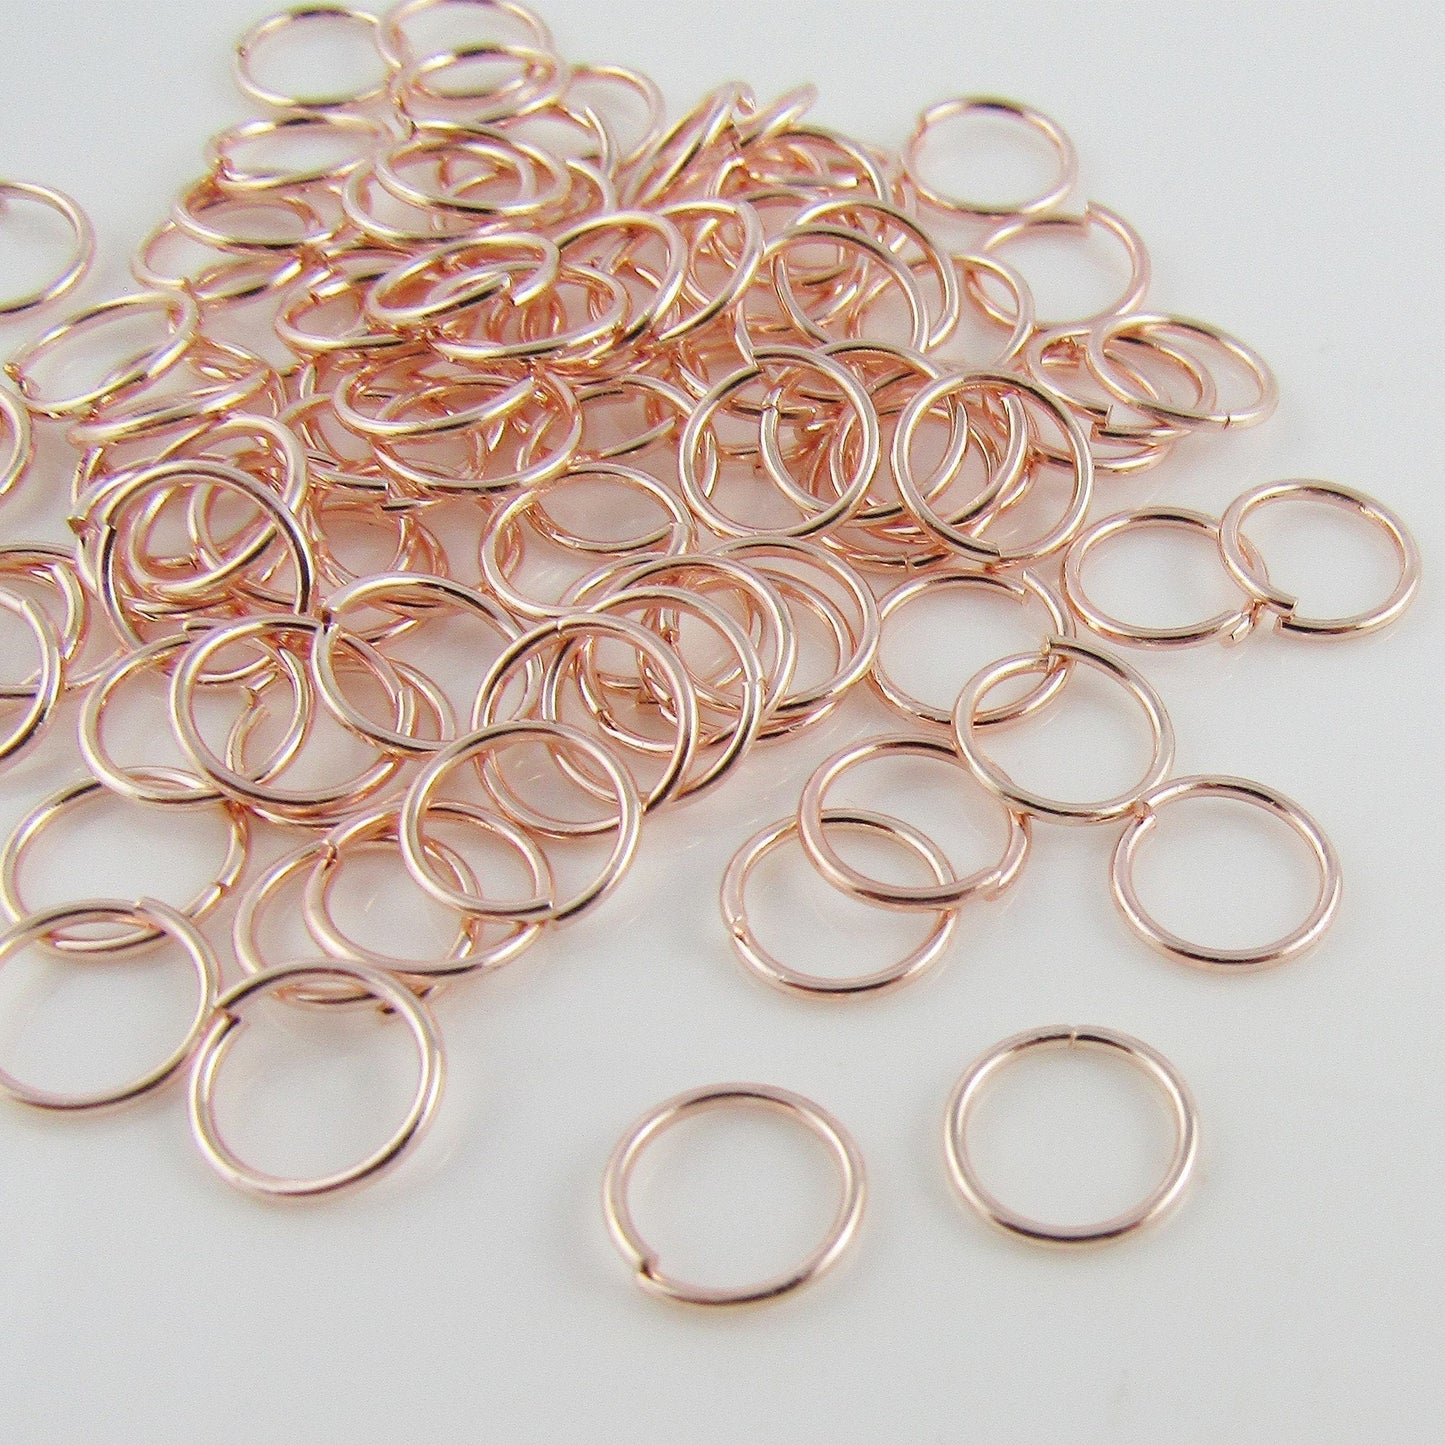 Bulk 175 pieces of 8x0.8mm Light Rose Gold Jump Rings Open Jumprings Findings